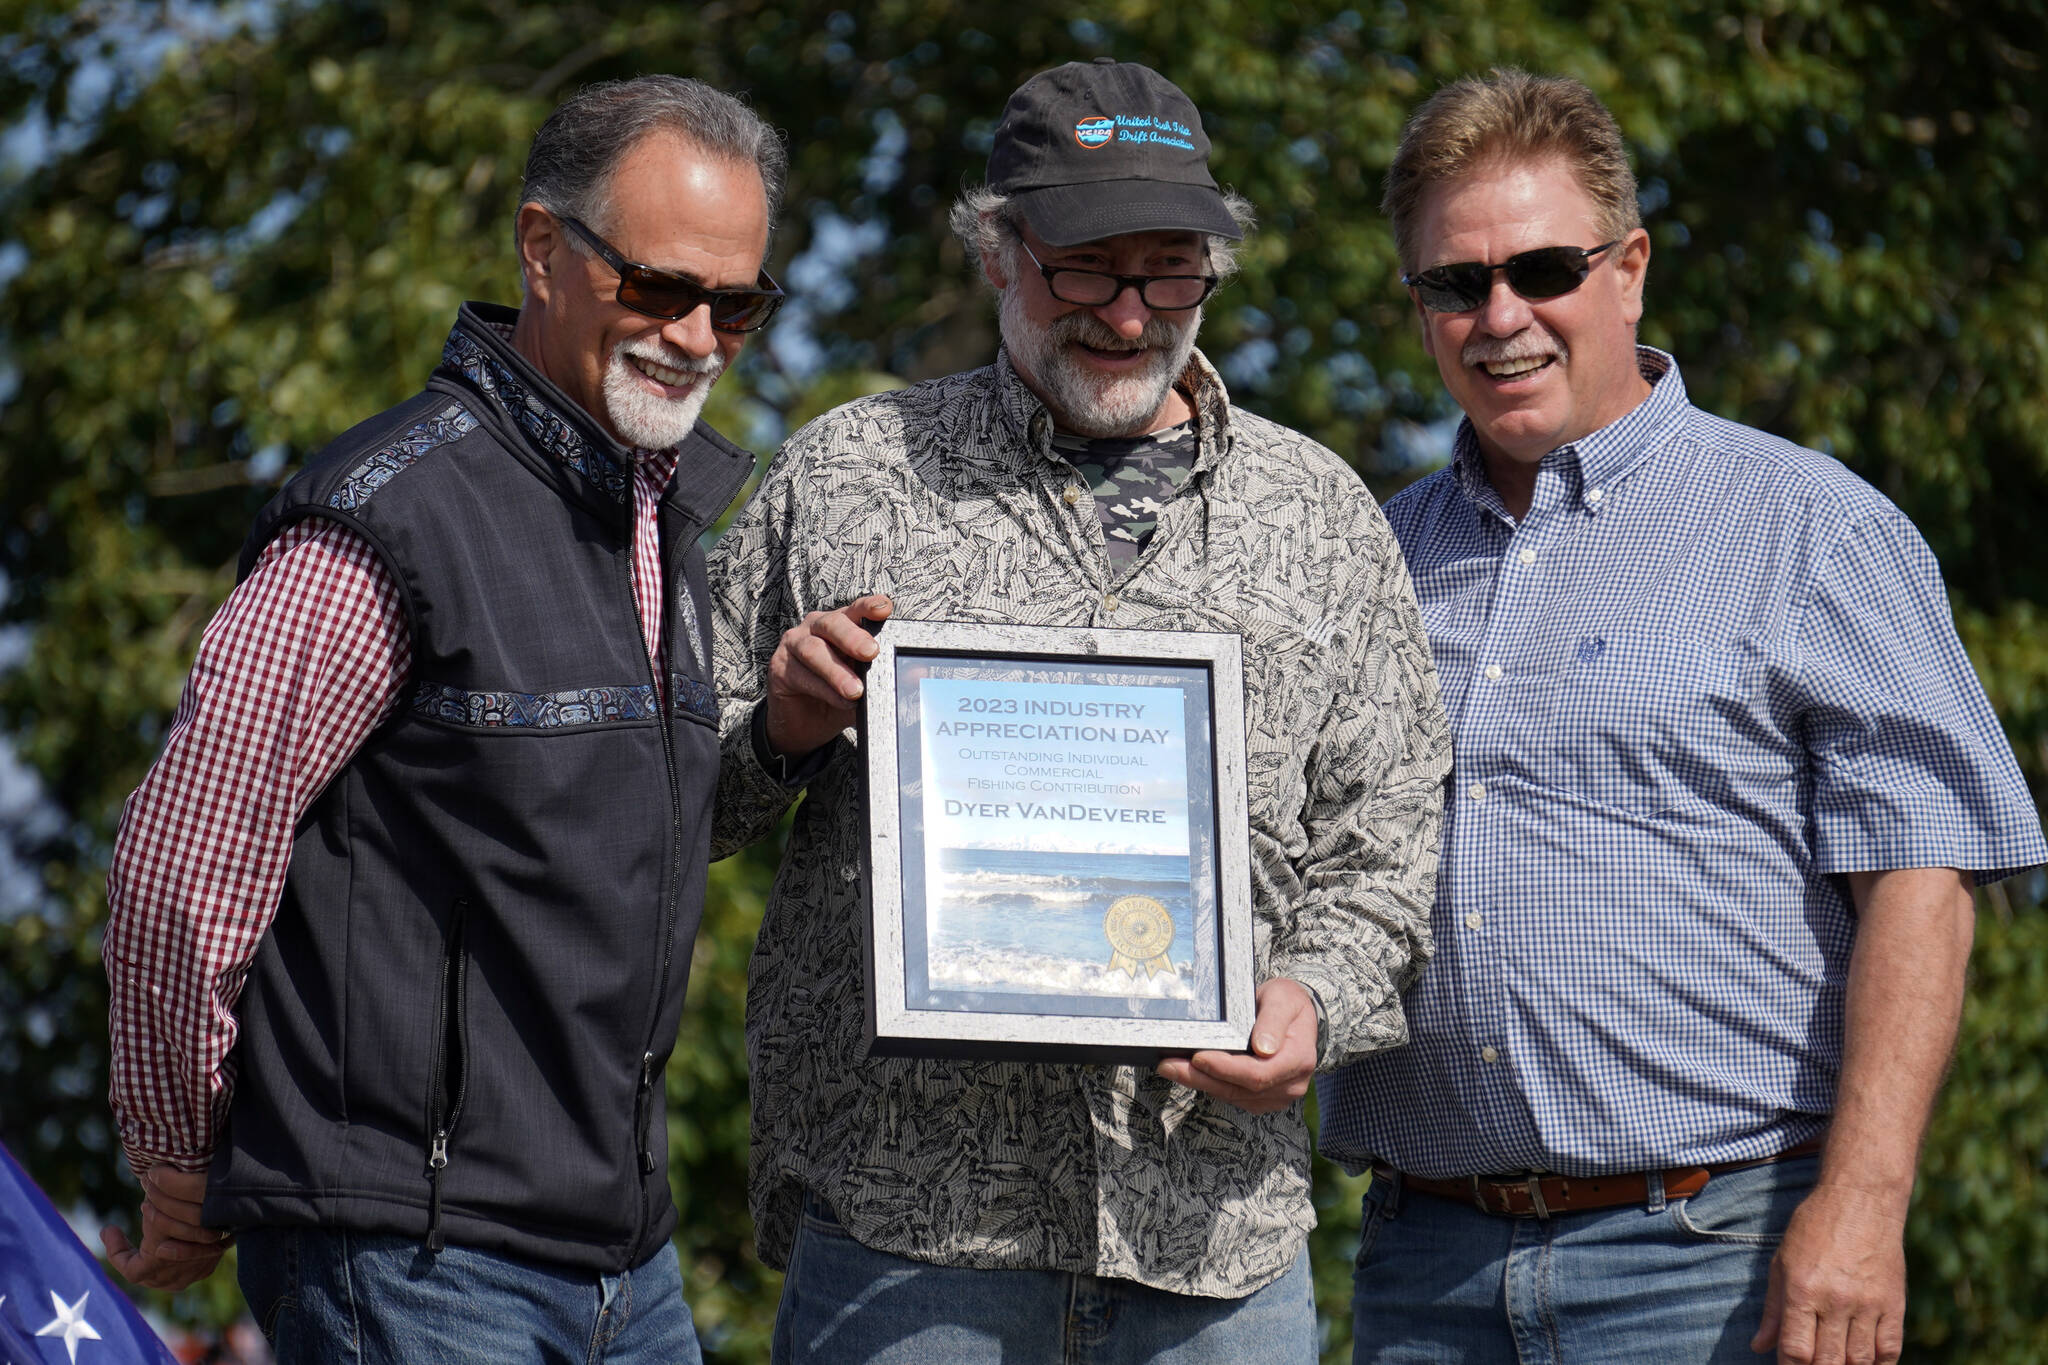 Dyer VanDevere, center, receives the Outstanding Individual Commercial Fishing Contribution Award from Kenai Peninsula Borough Mayor Peter Micciche and City of Kenai Mayor Brian Gabriel during Industry Appreciation Day festivities at the Kenai softball greenstrip on Saturday, Aug. 19, 2023. (Jake Dye/Peninsula Clarion)